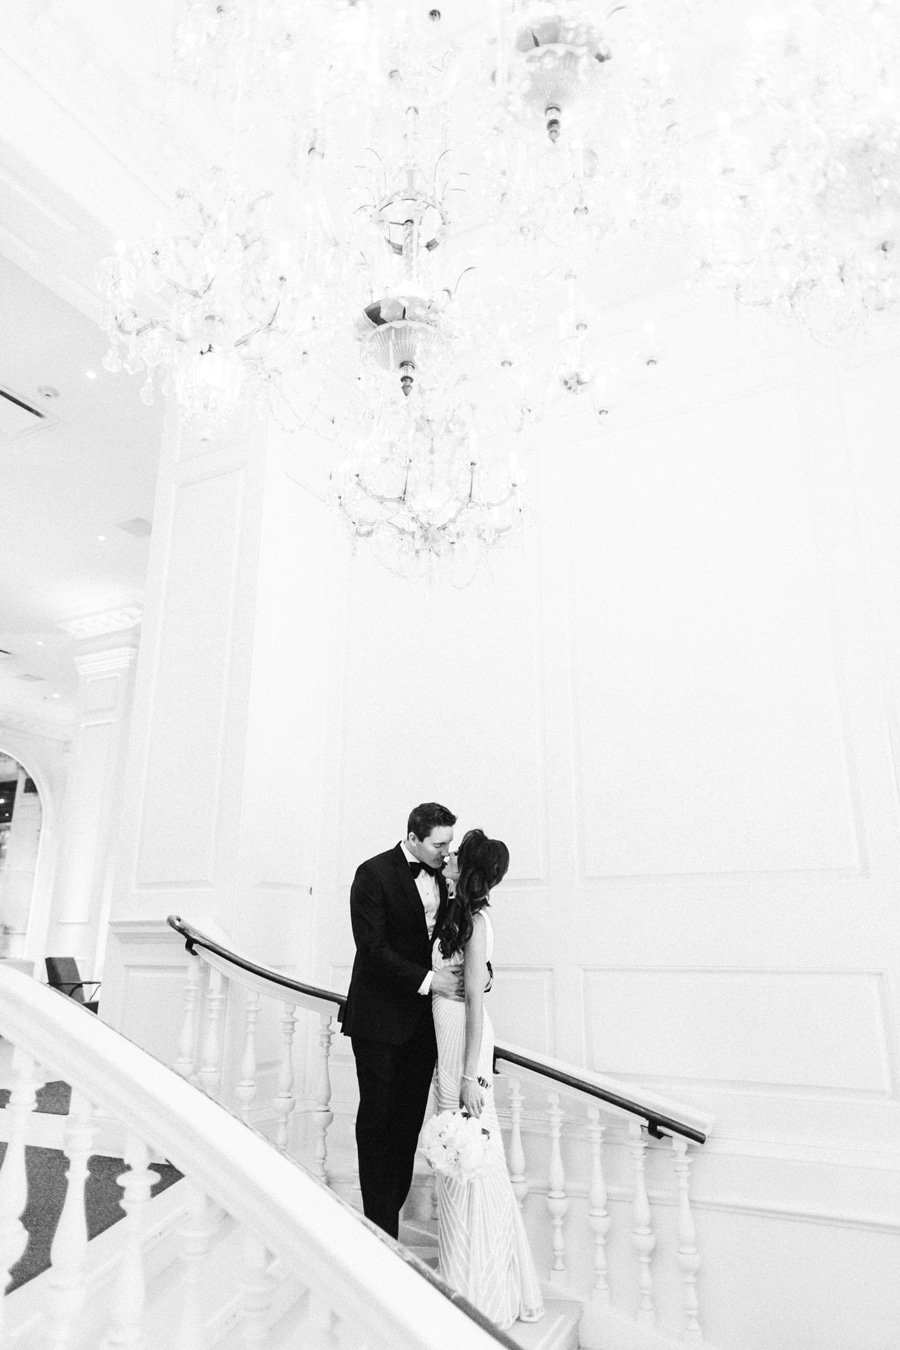 A beautiful black and white wedding portrait at the Ambassador Hotel in Chicago.